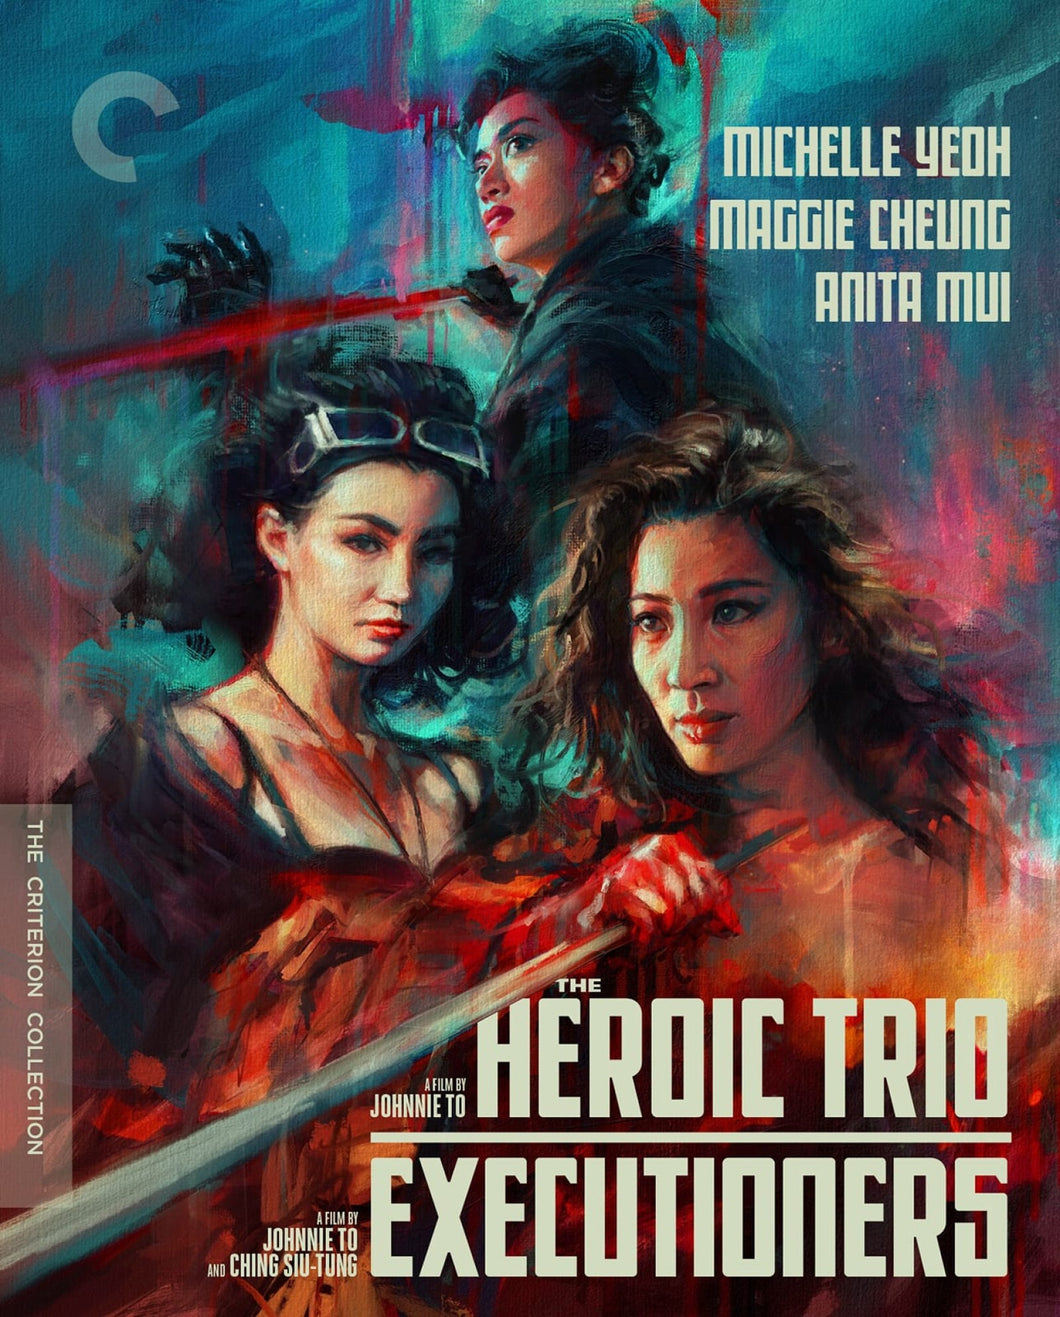 The Heroic Trio / Executioners 4K (1993) - front cover